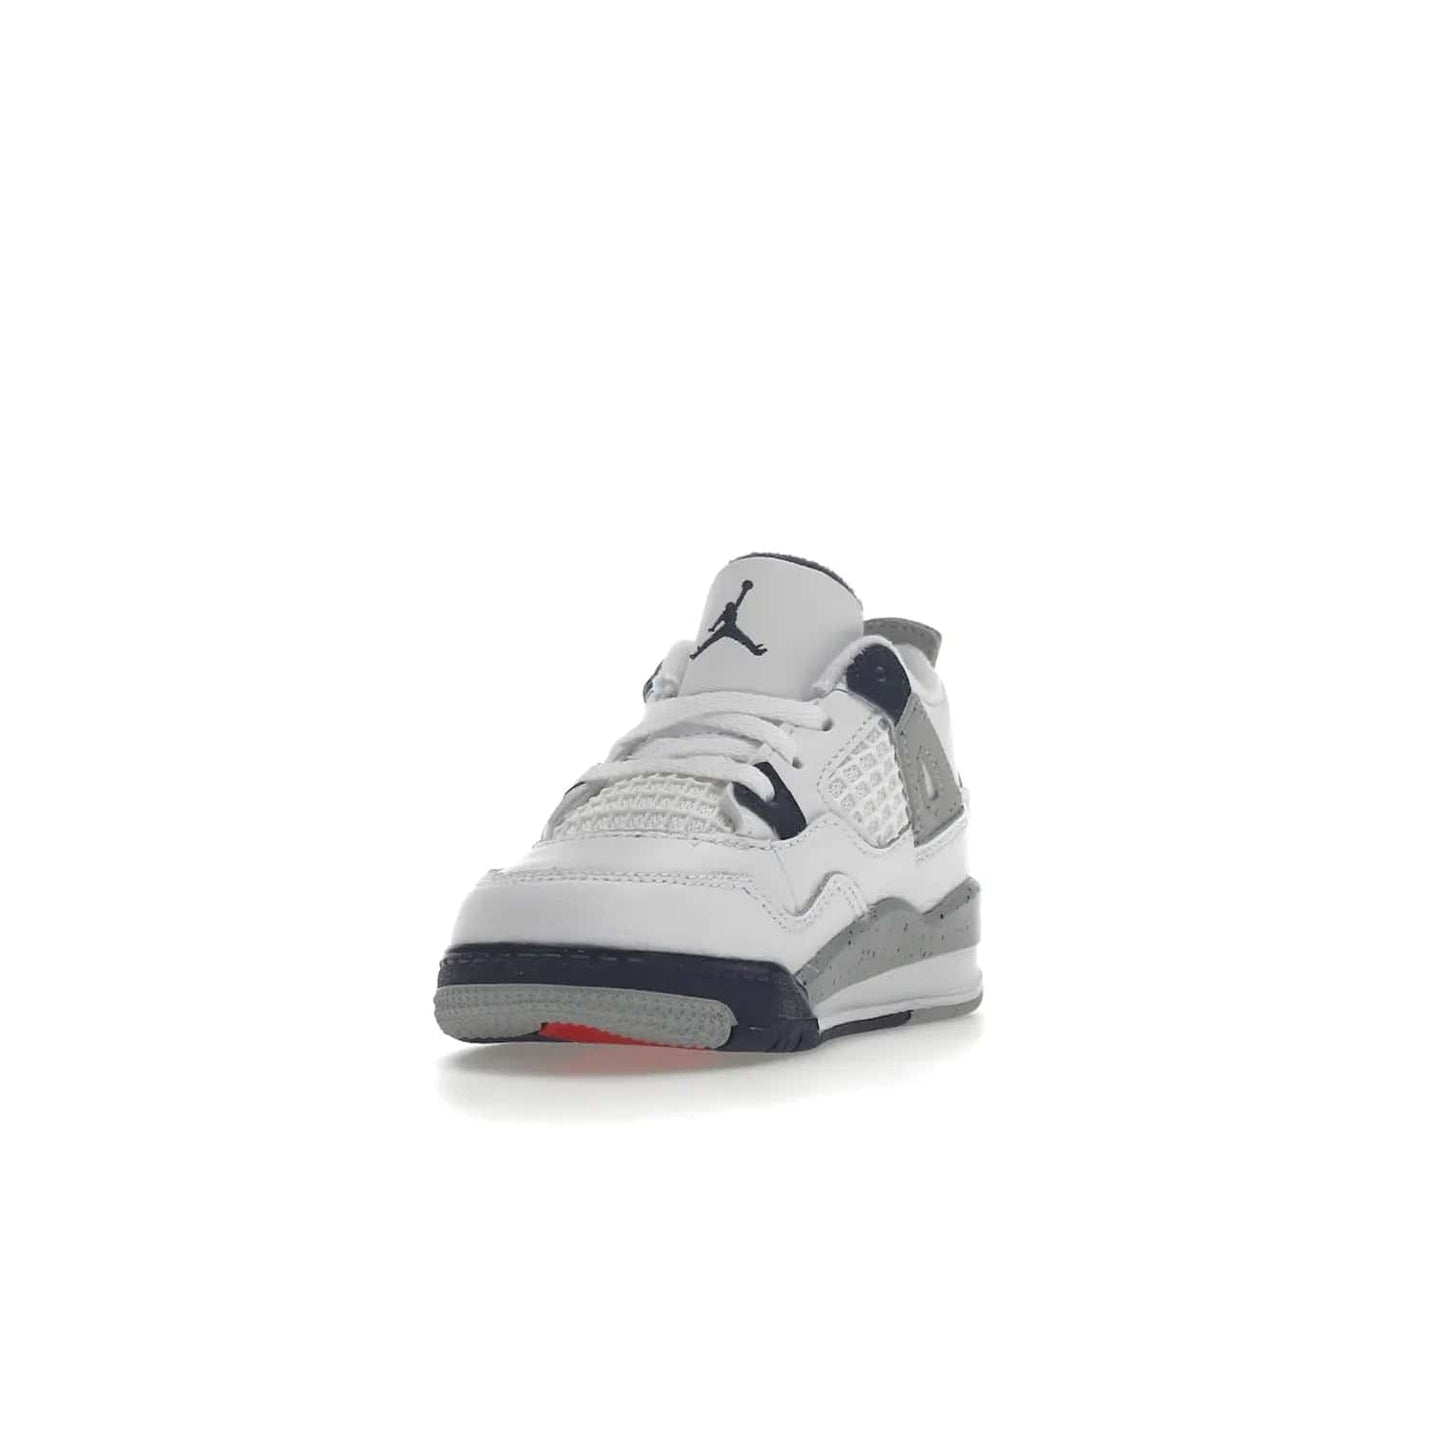 Jordan 4 Retro Midnight Navy (TD) - Image 13 - Only at www.BallersClubKickz.com - Introducing the Jordan 4 Retro Midnight Navy (TD) for kids. White leather upper with navy and grey accents plus fire red detailing. Perfect for everyday wear. Get yours before they sell out.